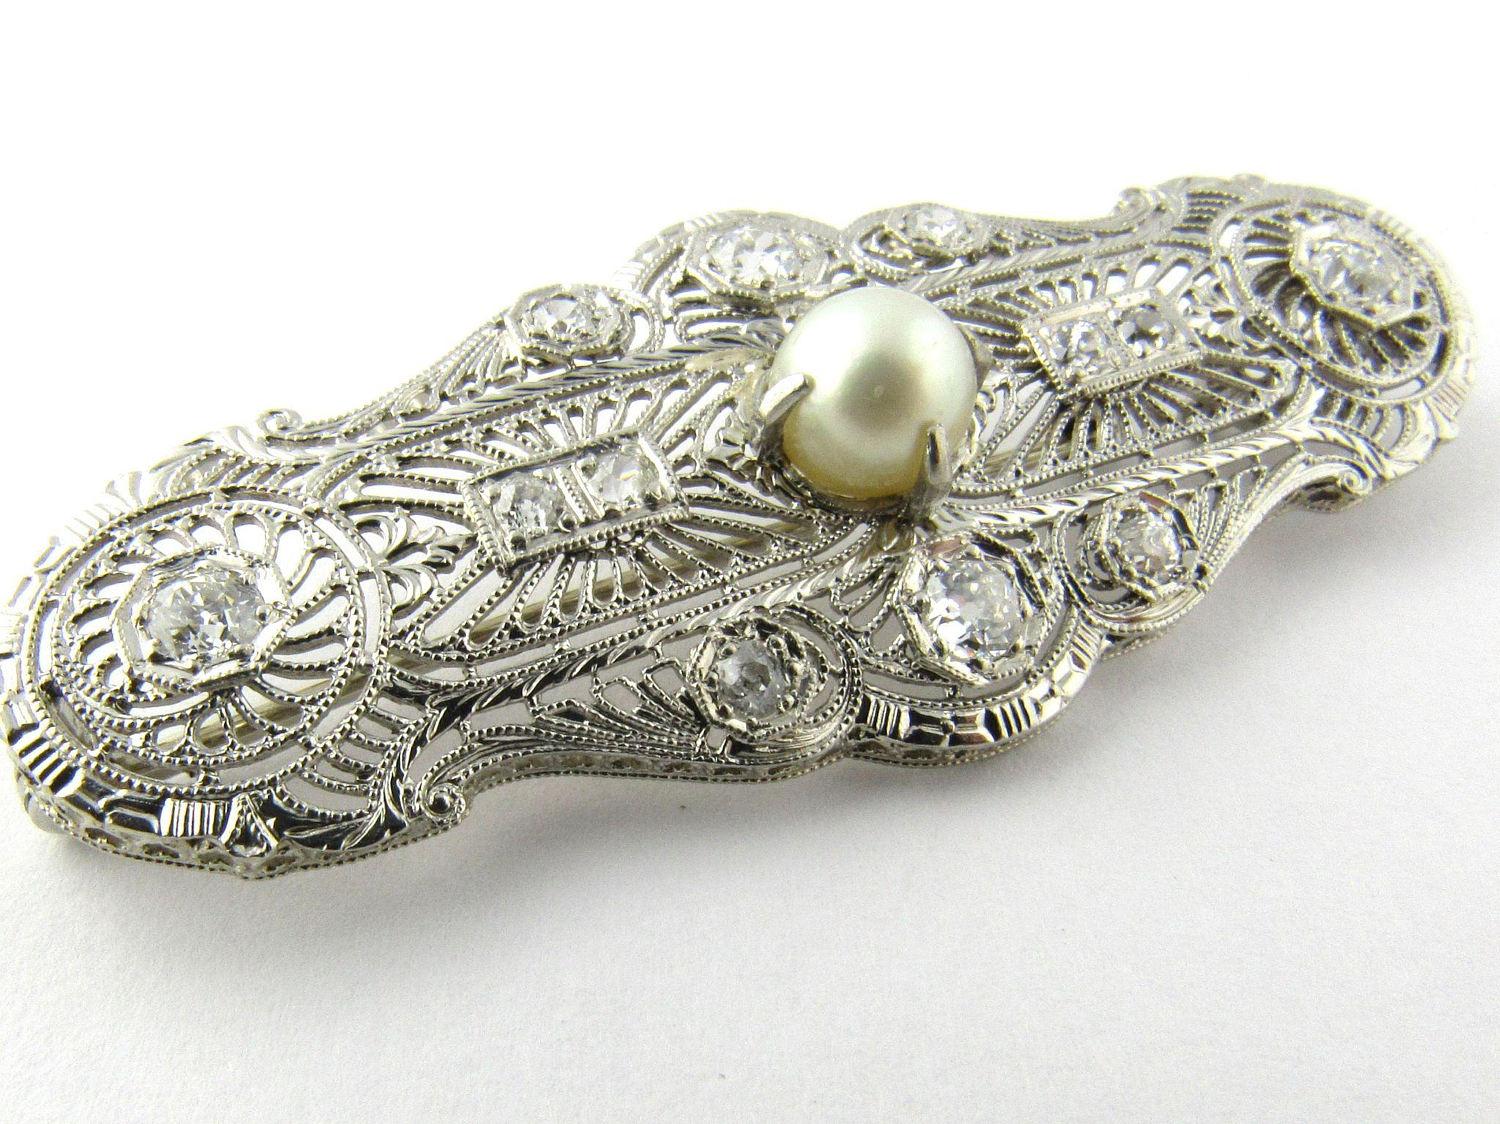 Antique 14K White Gold Diamond and Pearl Filagree Pendant Brooch 

This absolutely stunning and sparkling diamond pendant can also be worn as a brooch. It is the perfect piece to adorn that fancy dress for a special occasion. 

This pendant/brooch